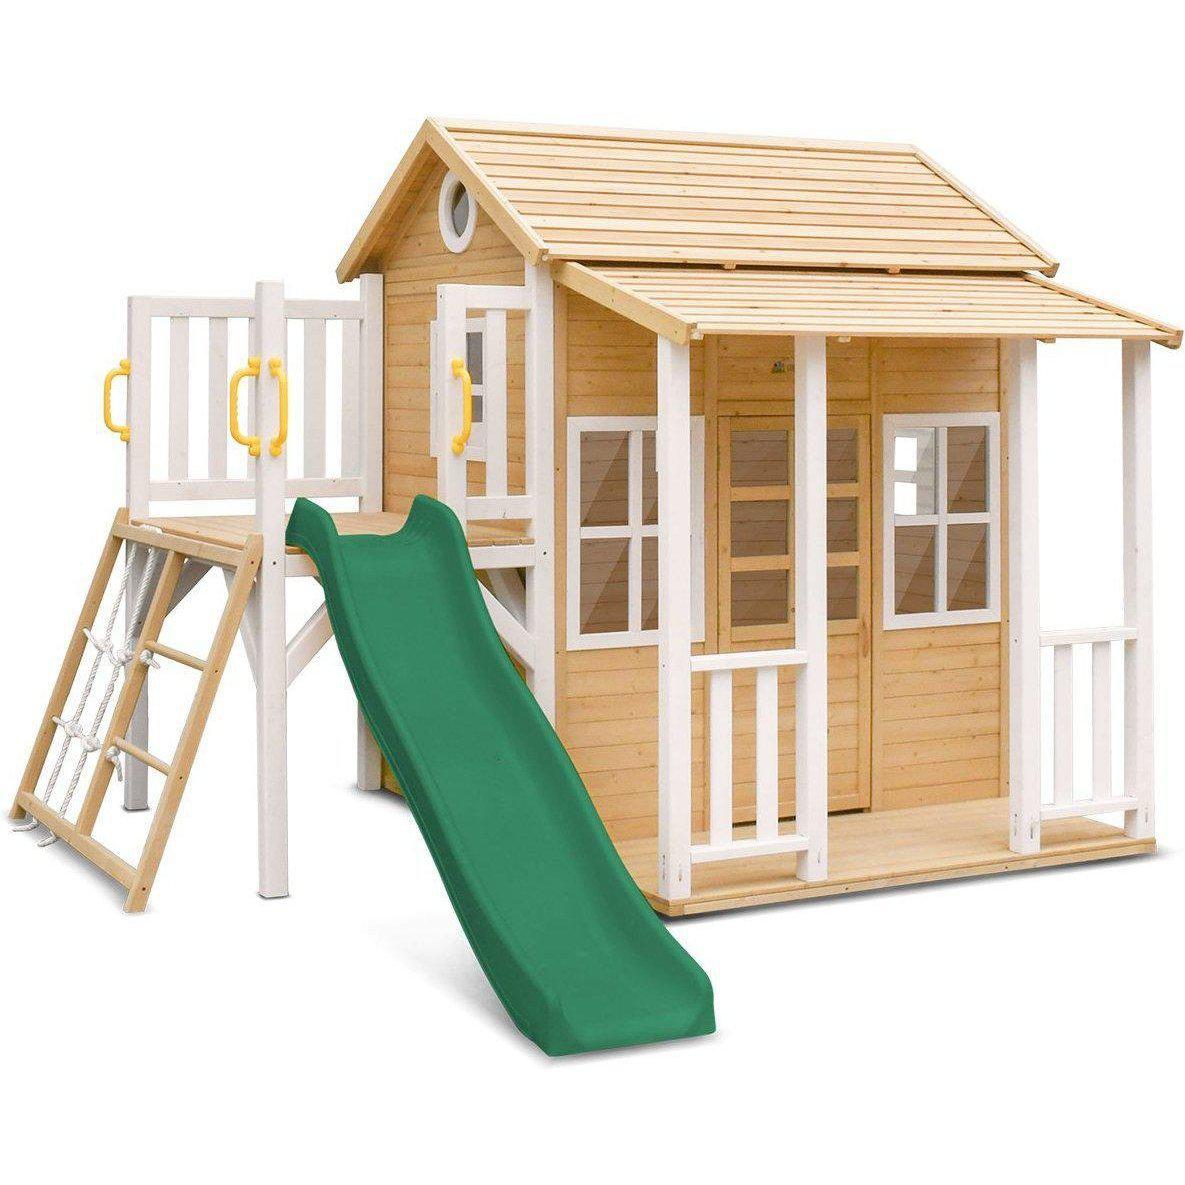 Shop Finley Cubby House with Green Slide: Adventure Awaits Your Kids